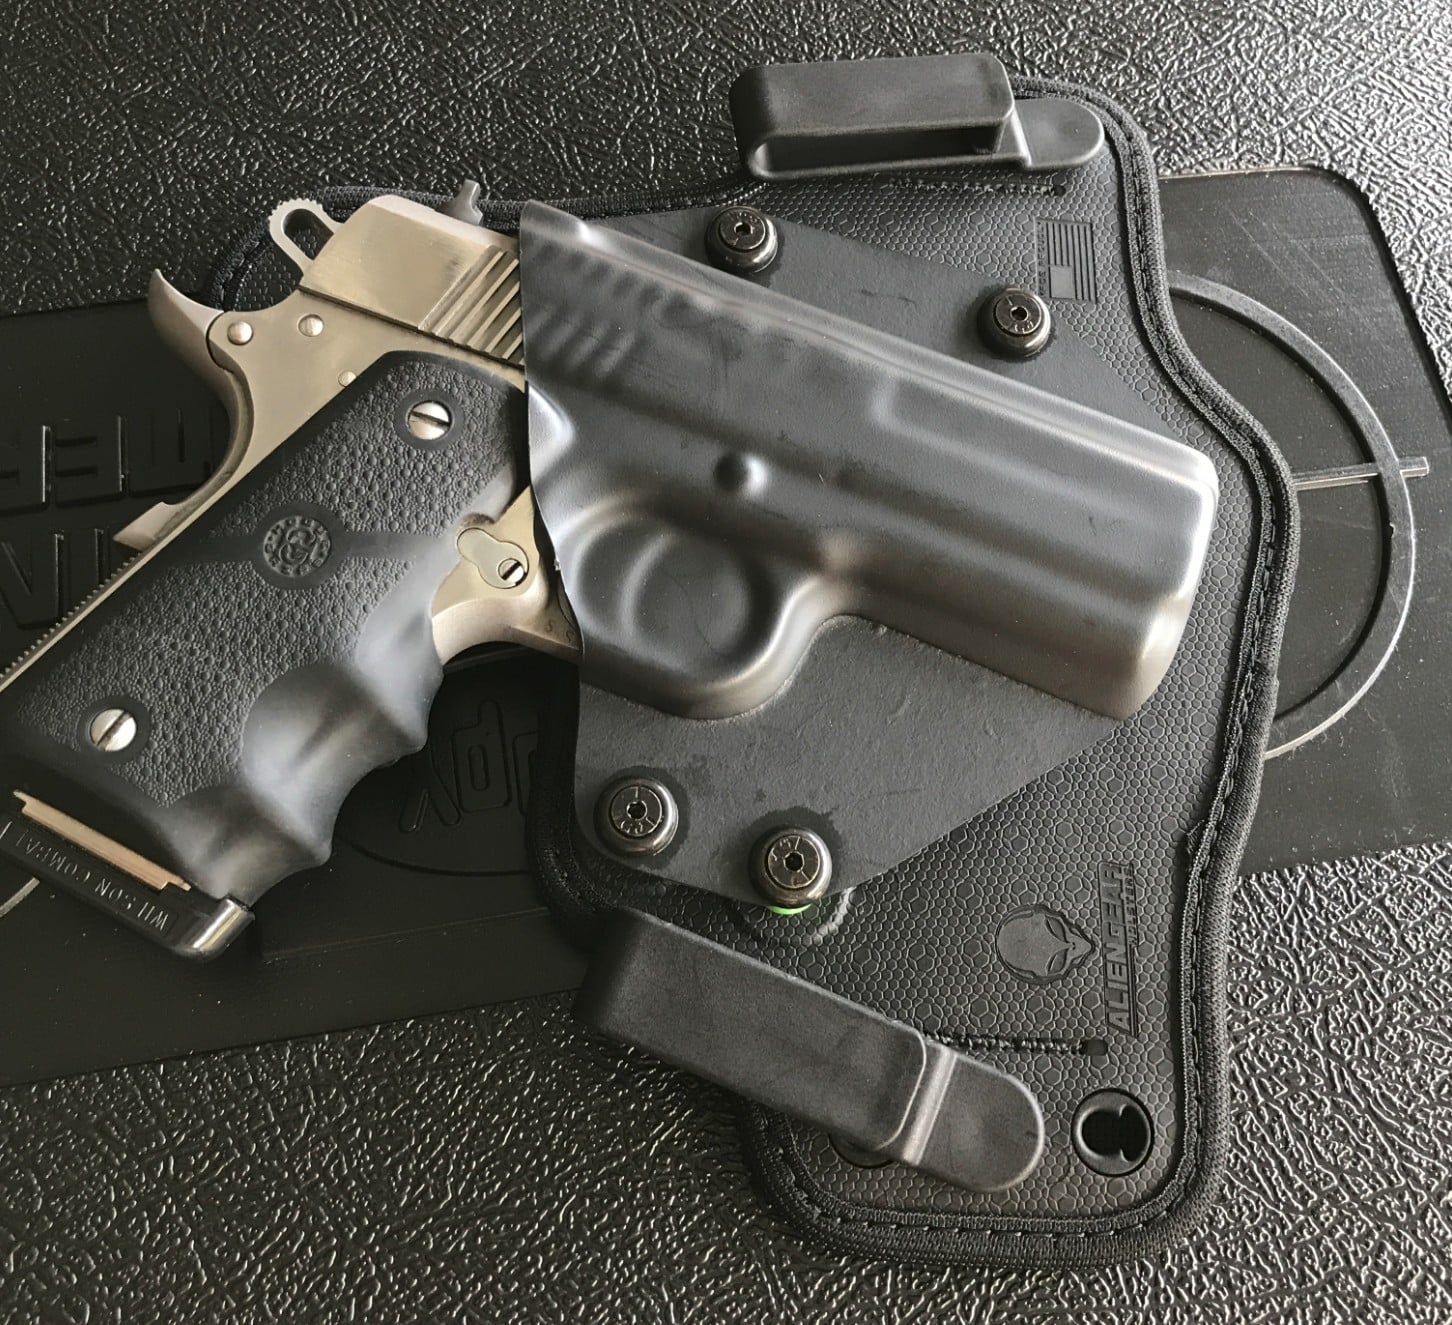 #DIGTHERIG – Randy and his Springfield Armory V10 Ultra Compact in an Alien Gear Holster